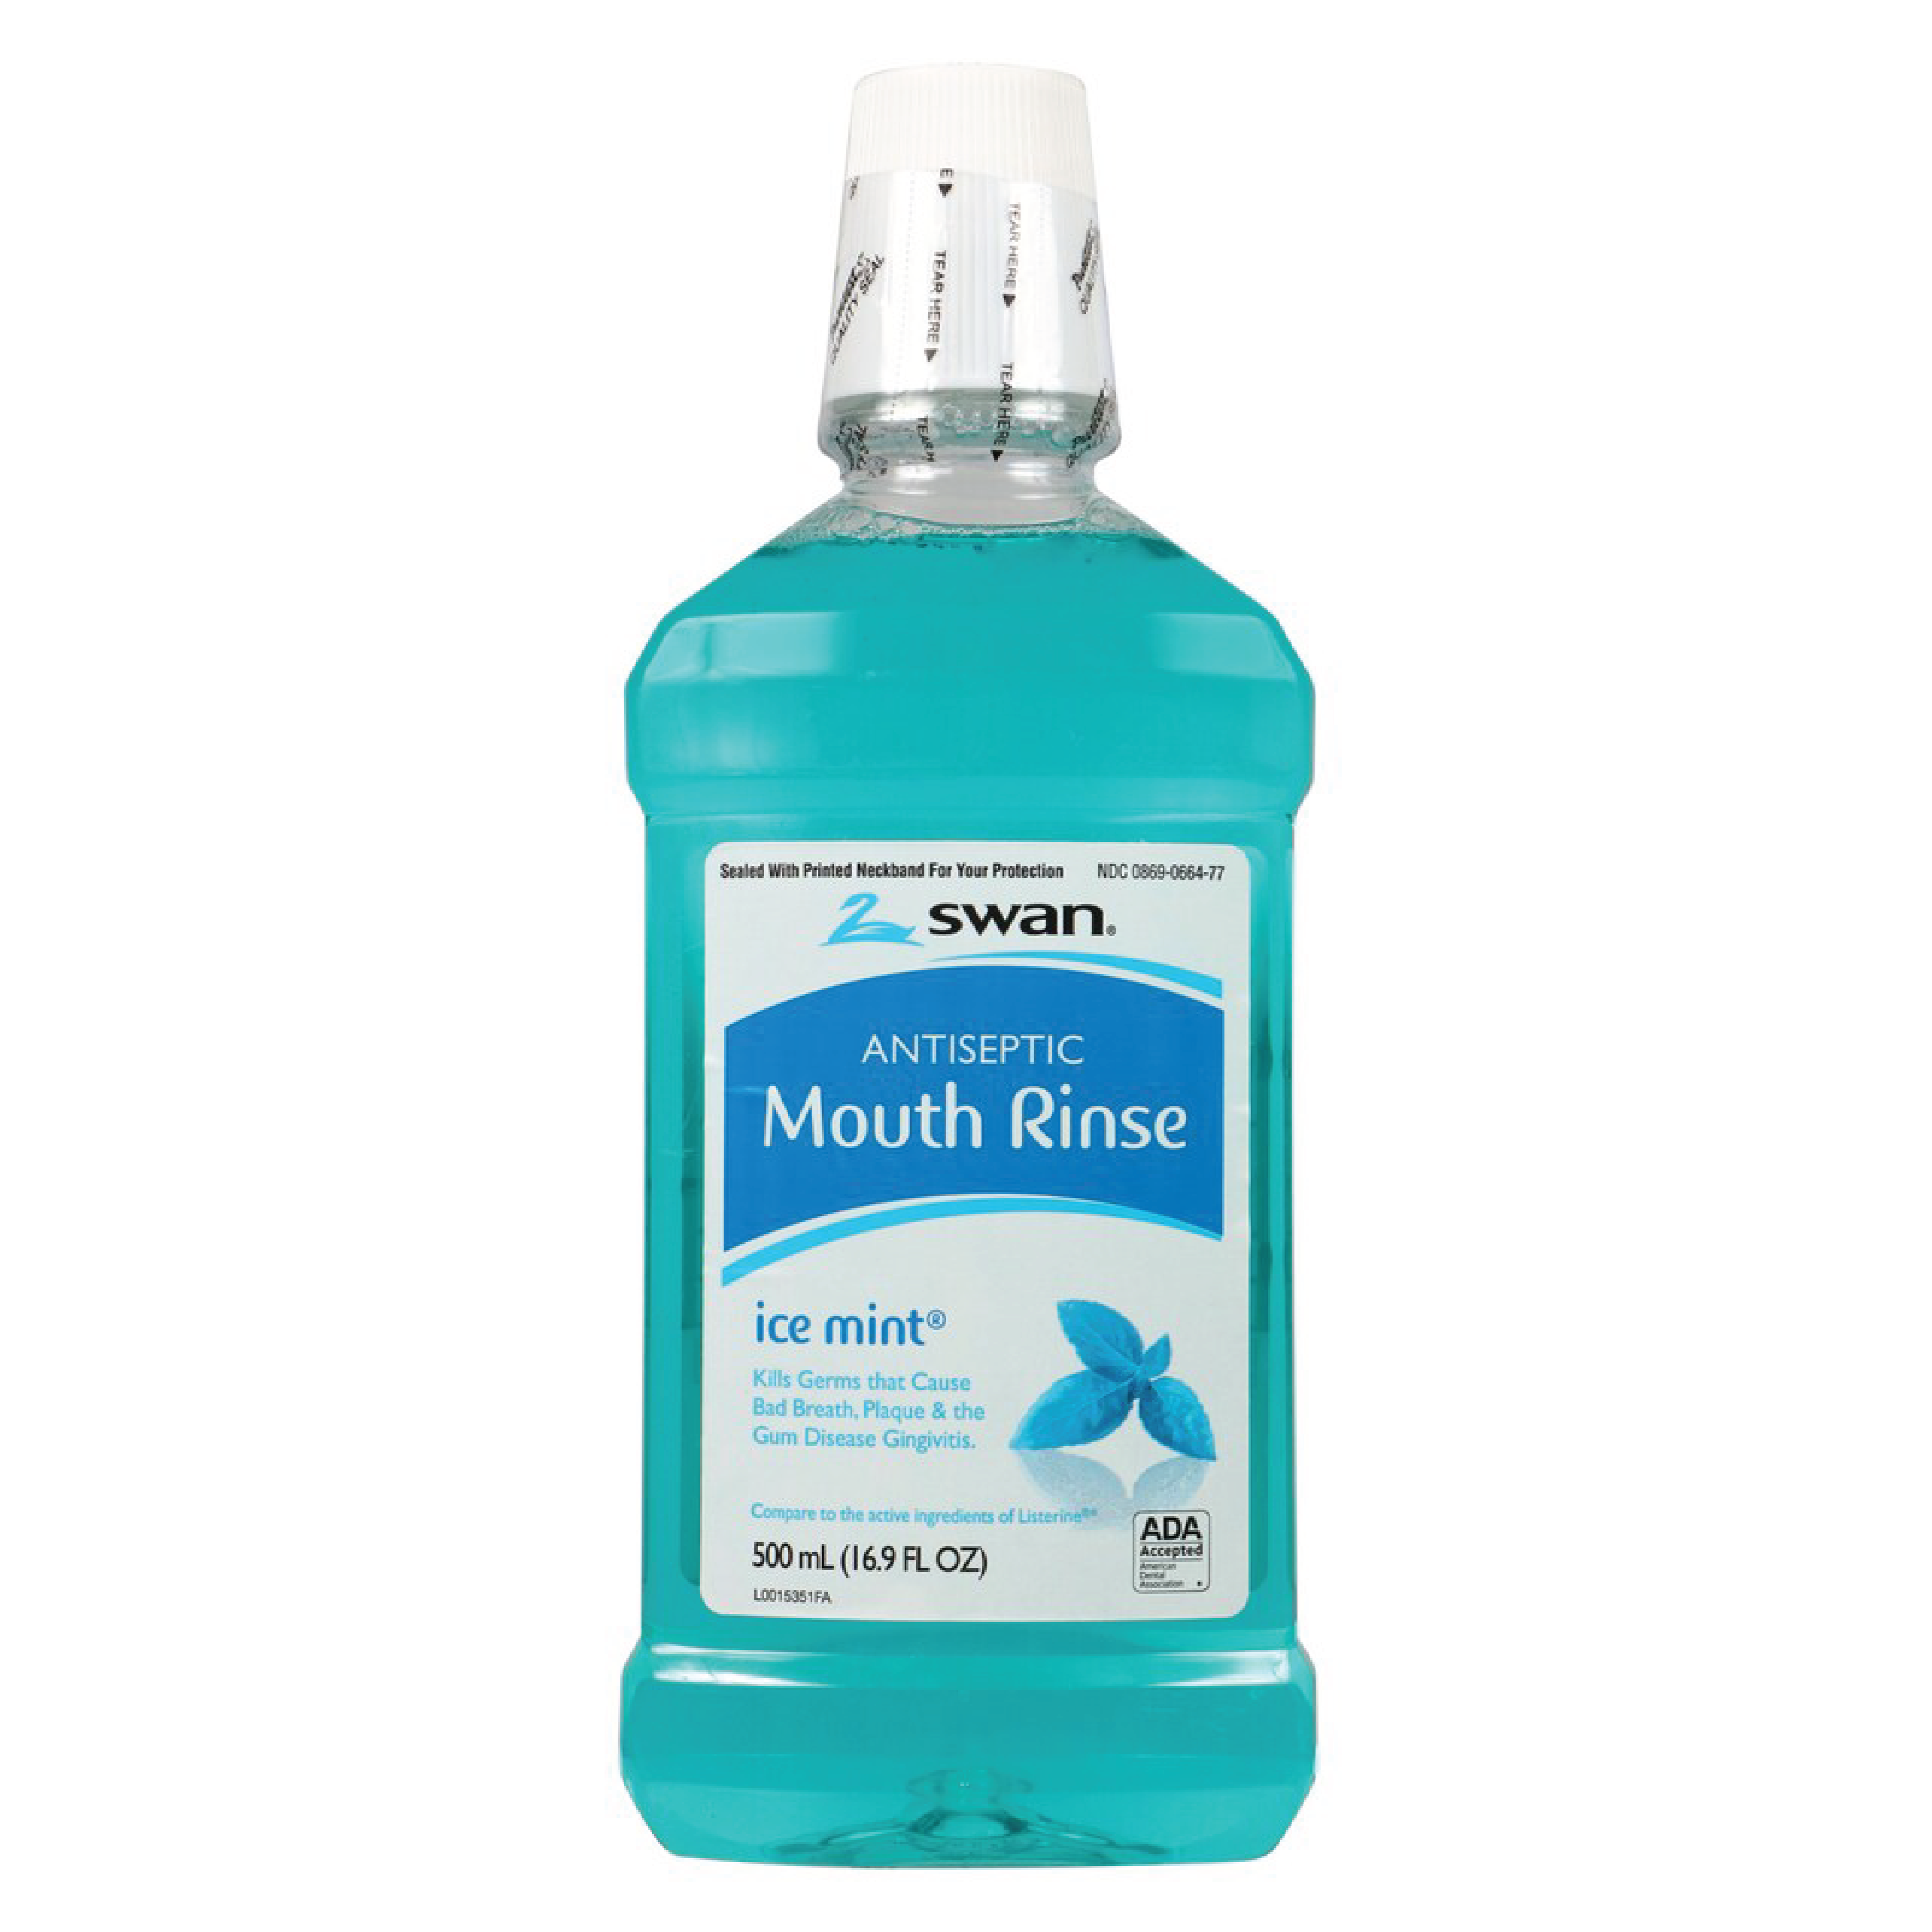 Swan Ice Mint Antiseptic Mouth Rinse 16.9oz